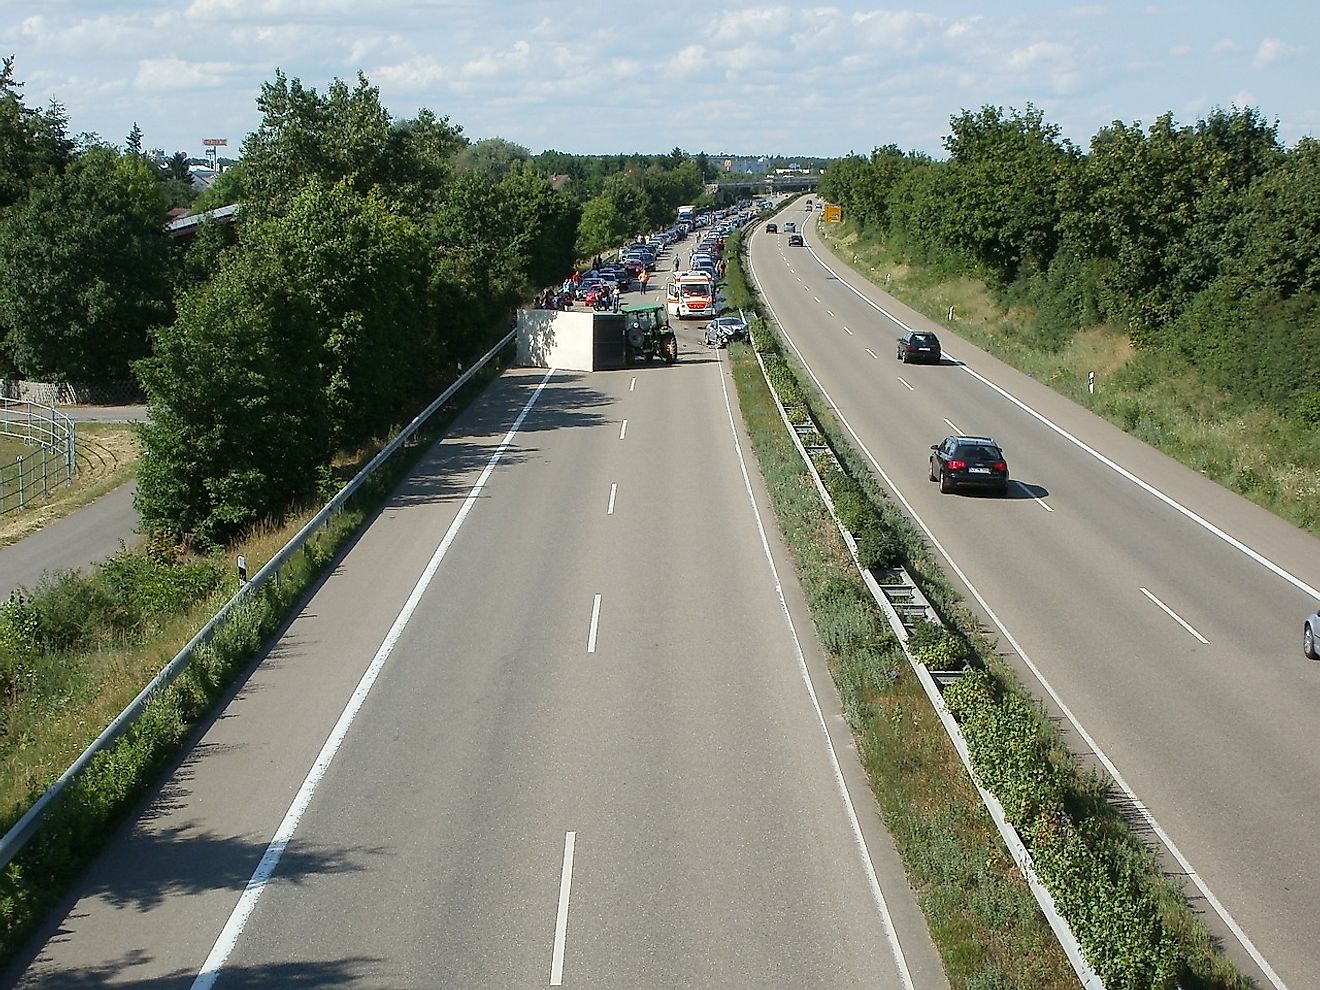 The scene of an accident on the Autobahn. Image credit: Needpix.com